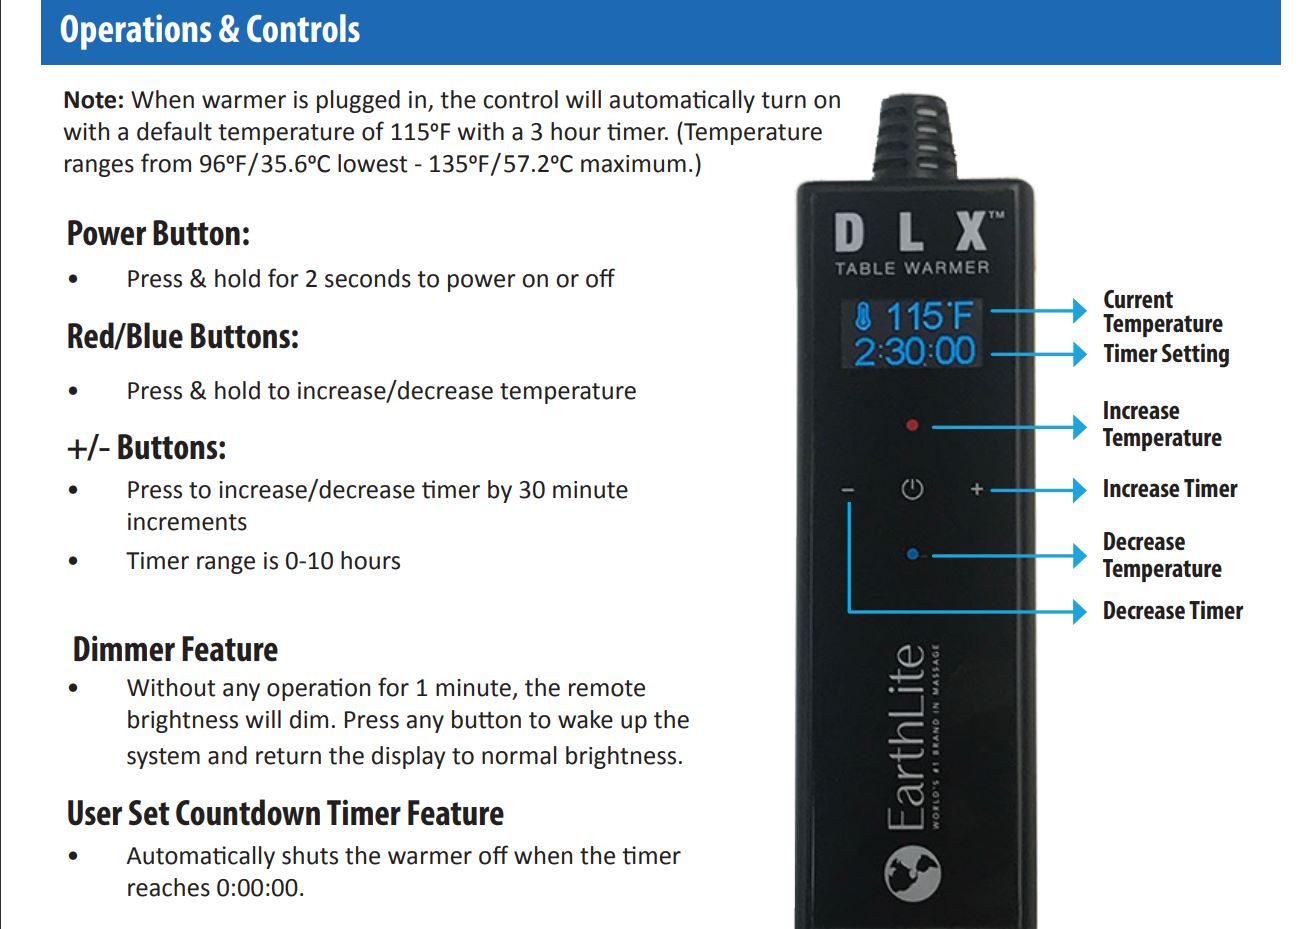 Digital controller features for the Earthlite DLX table warmer.